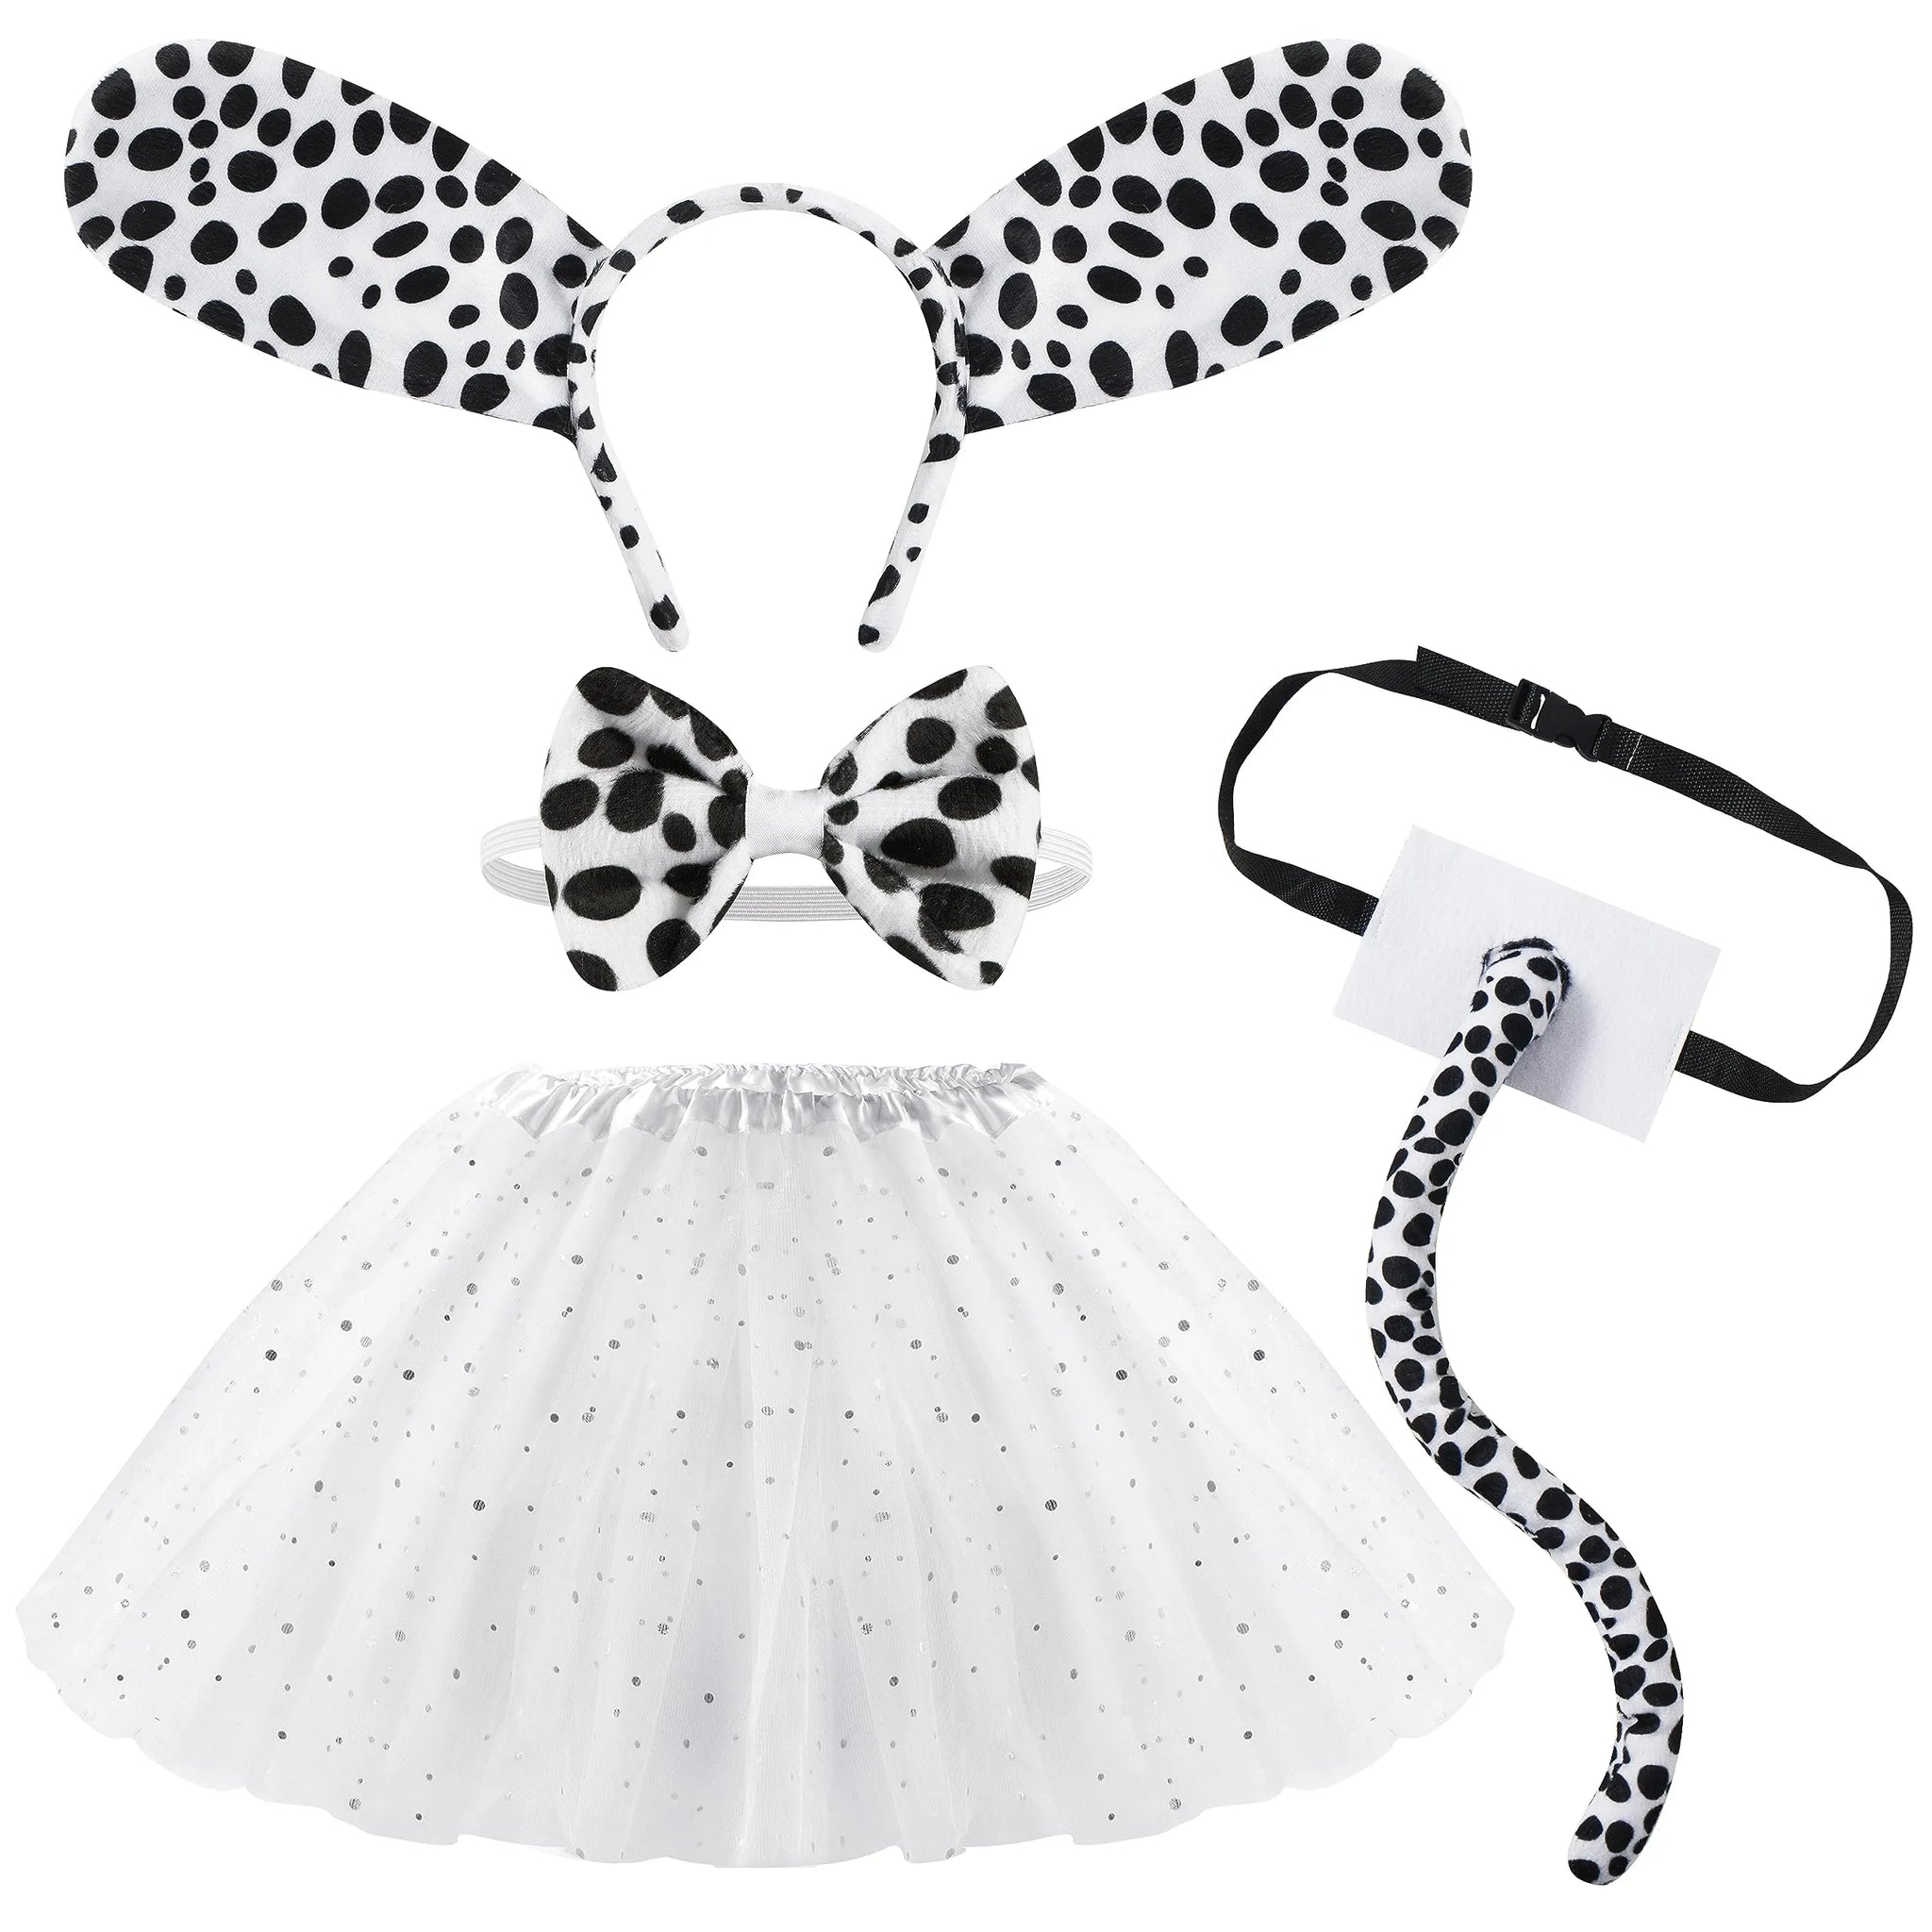 Dalmatian Dog Costume Set - Black and White Dog Ears Headband, Bowtie and  Tail Accessories Set for Dog Costumes for Toddlers and Kids